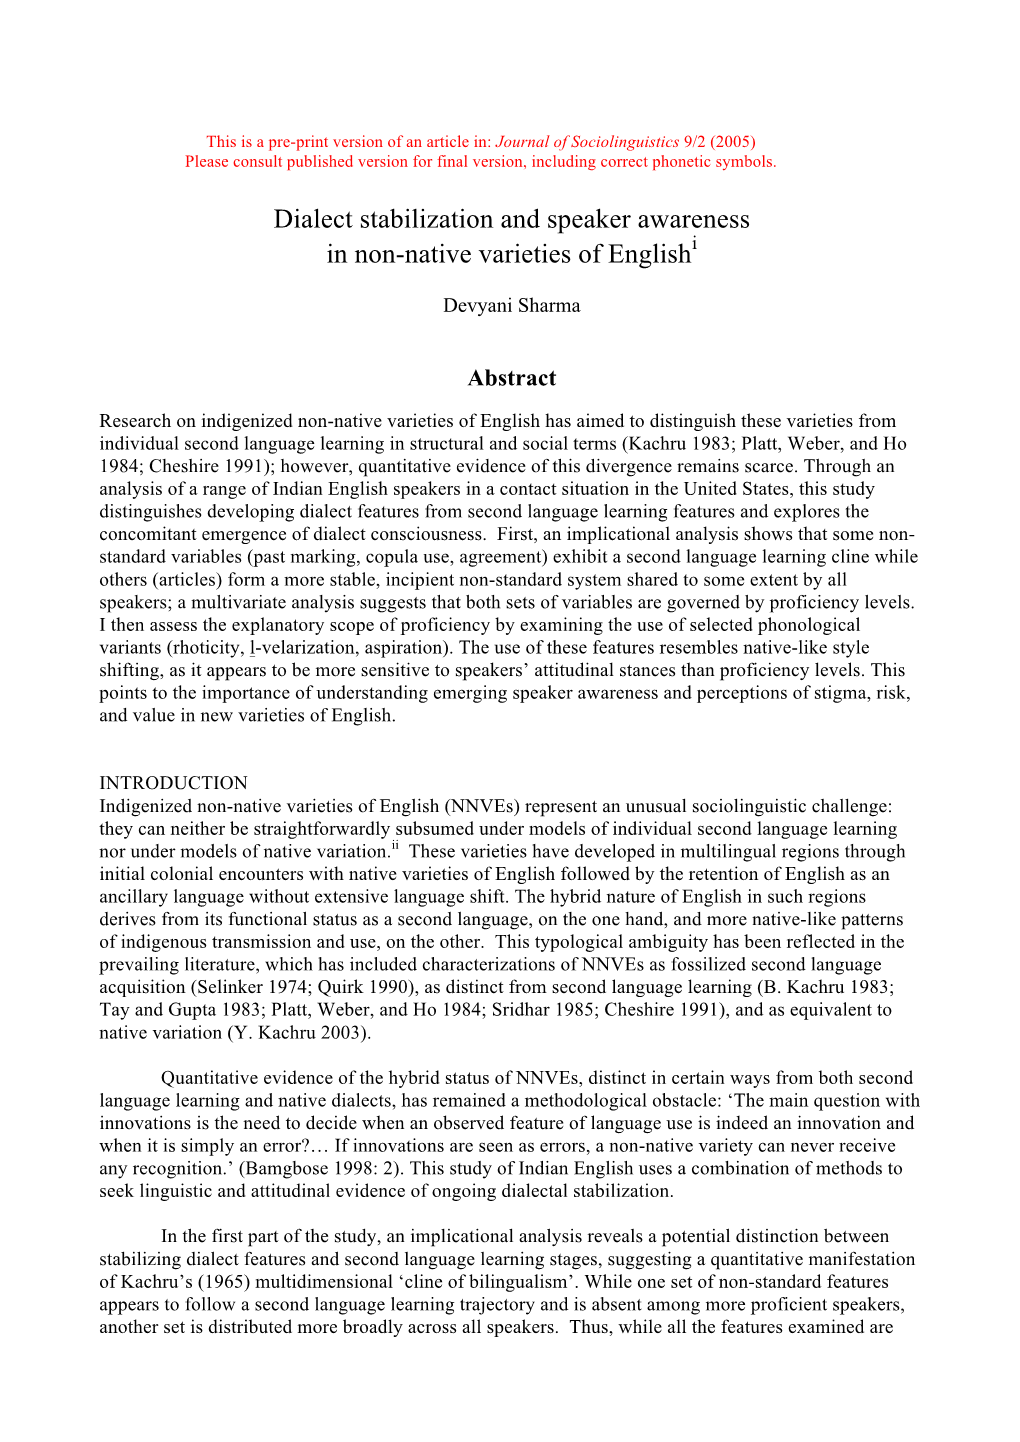 Dialect Stabilization and Speaker Awareness in Non-Native Varieties of Englishi